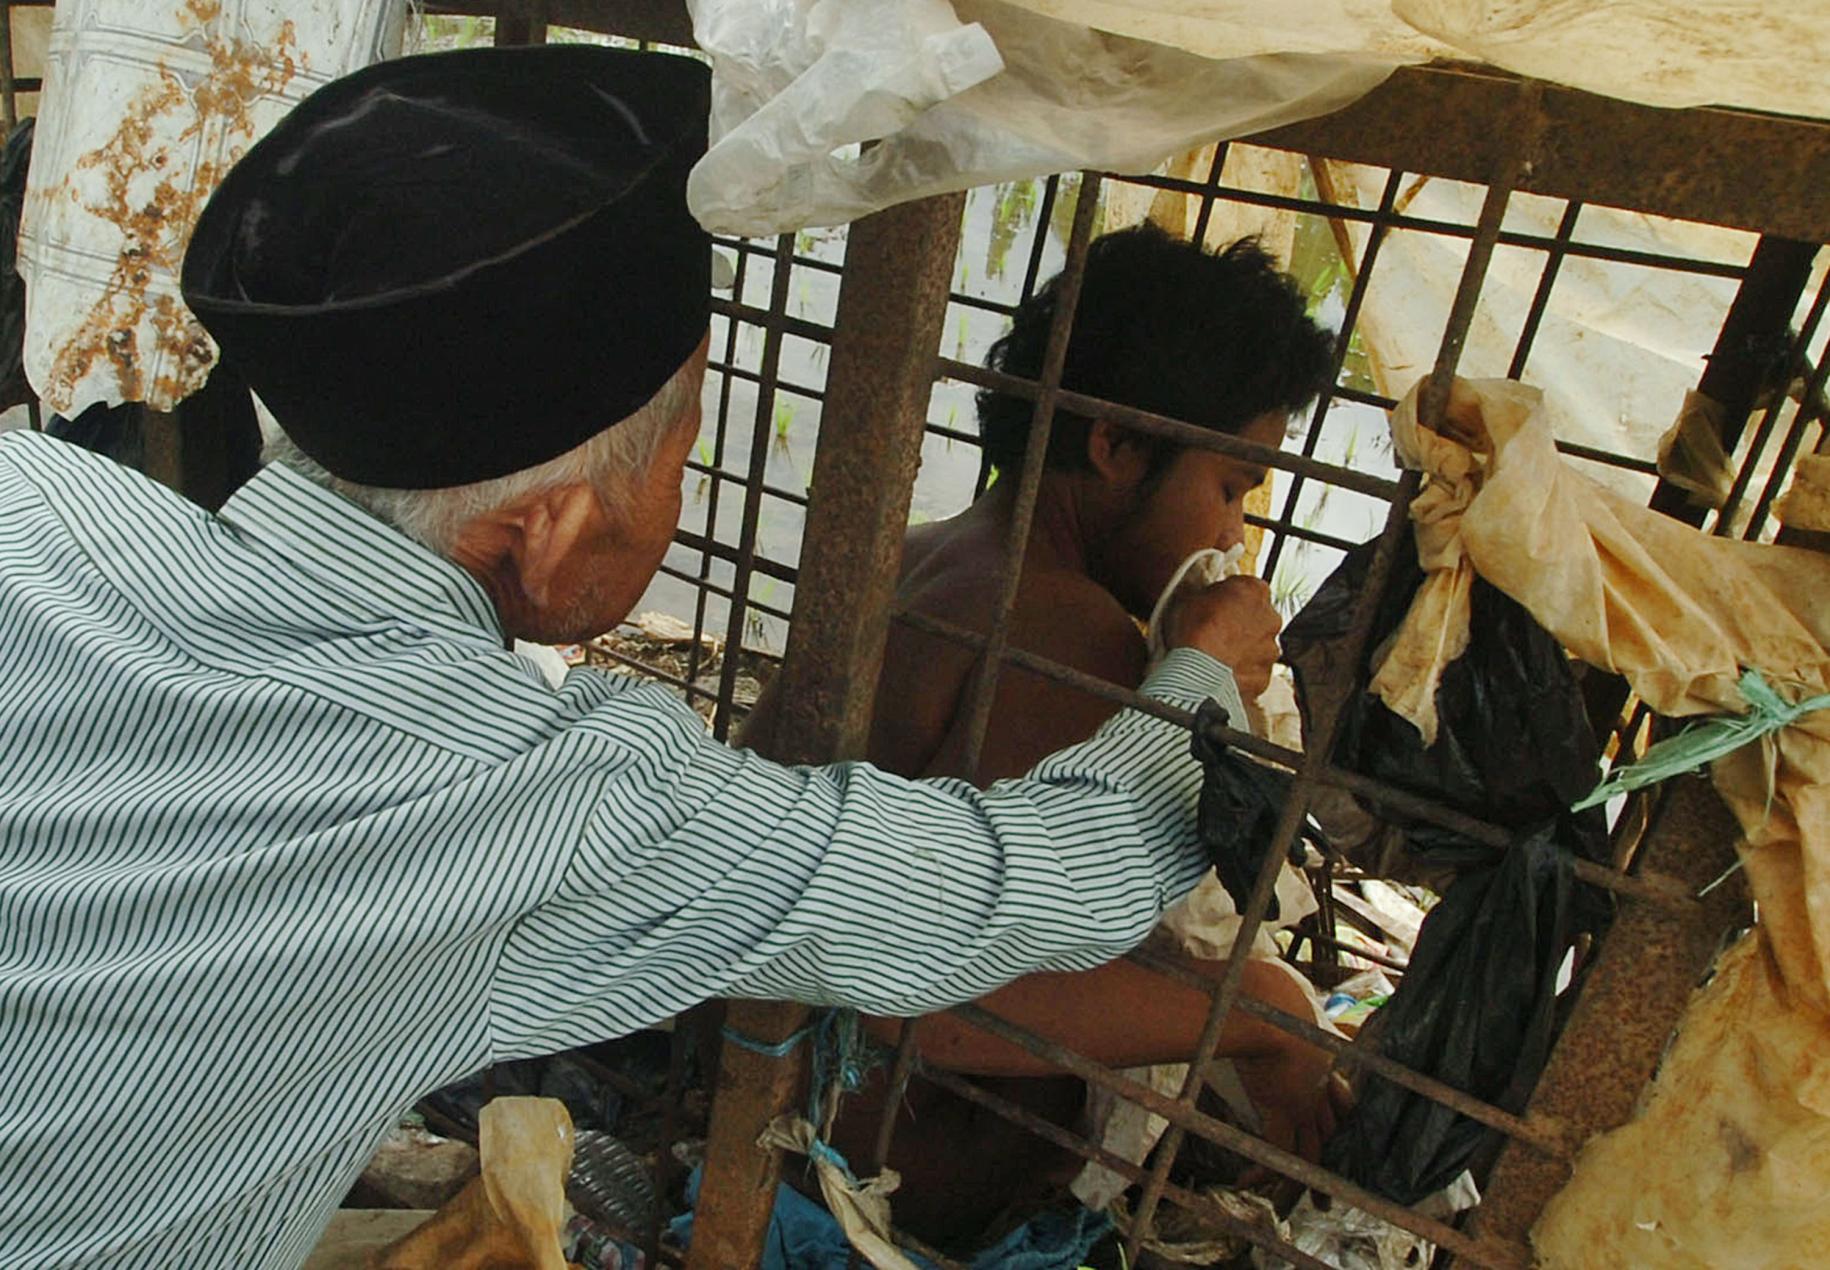 A young man in a cage is being helped by an older man in a black hat outside of the cage. 